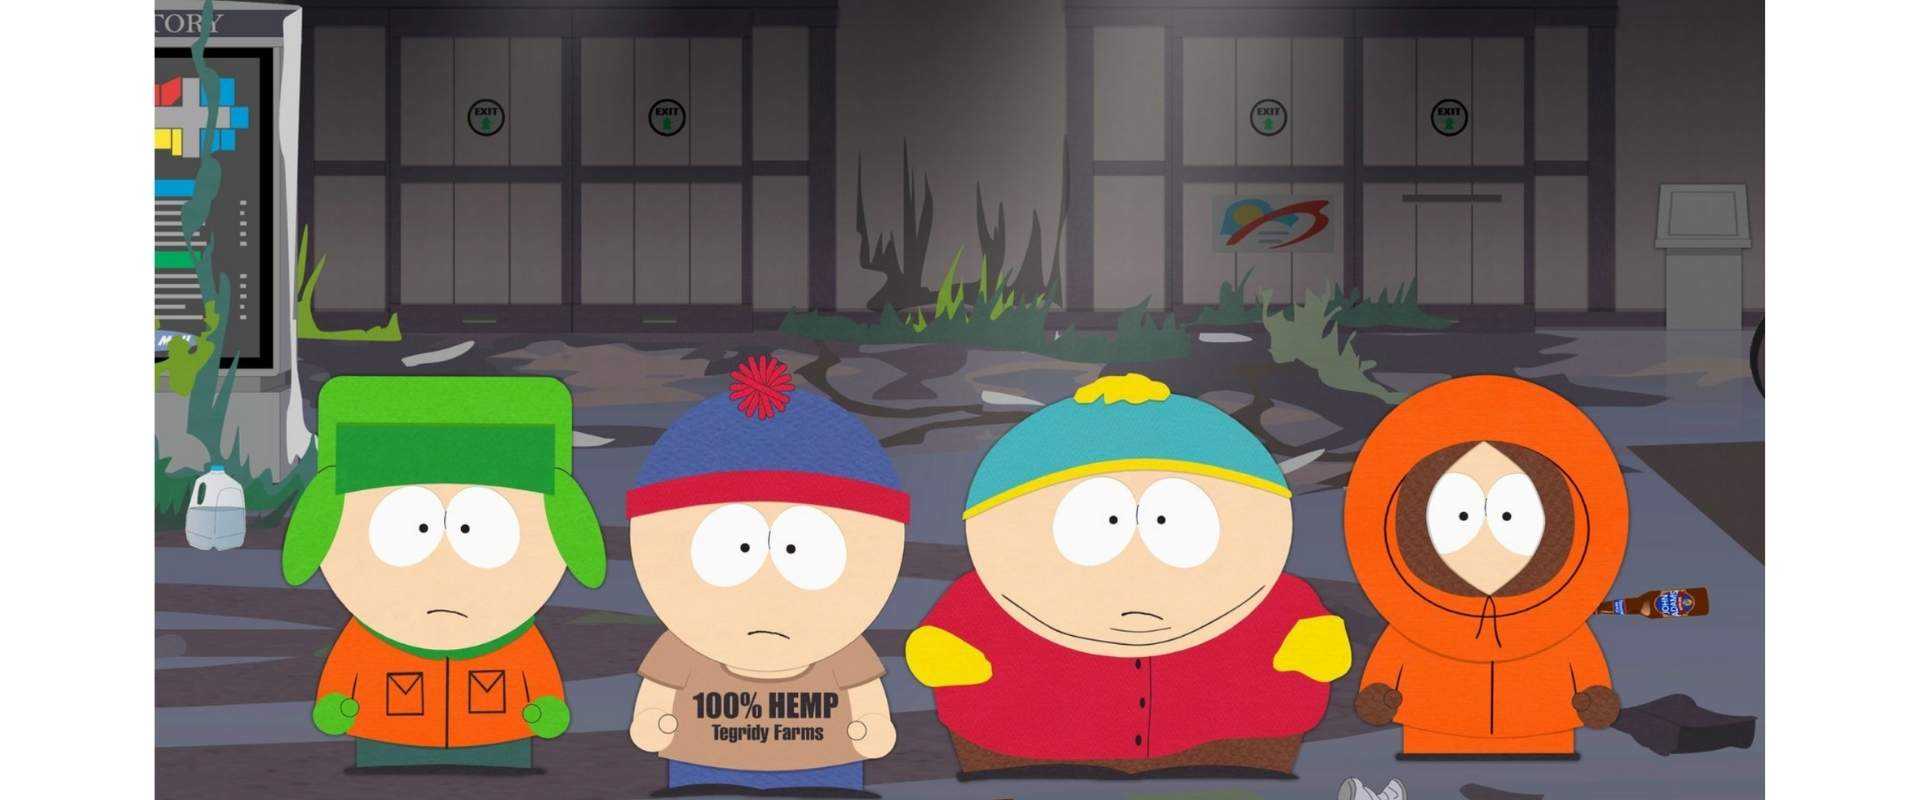 South Park is the best example of cut-out animation